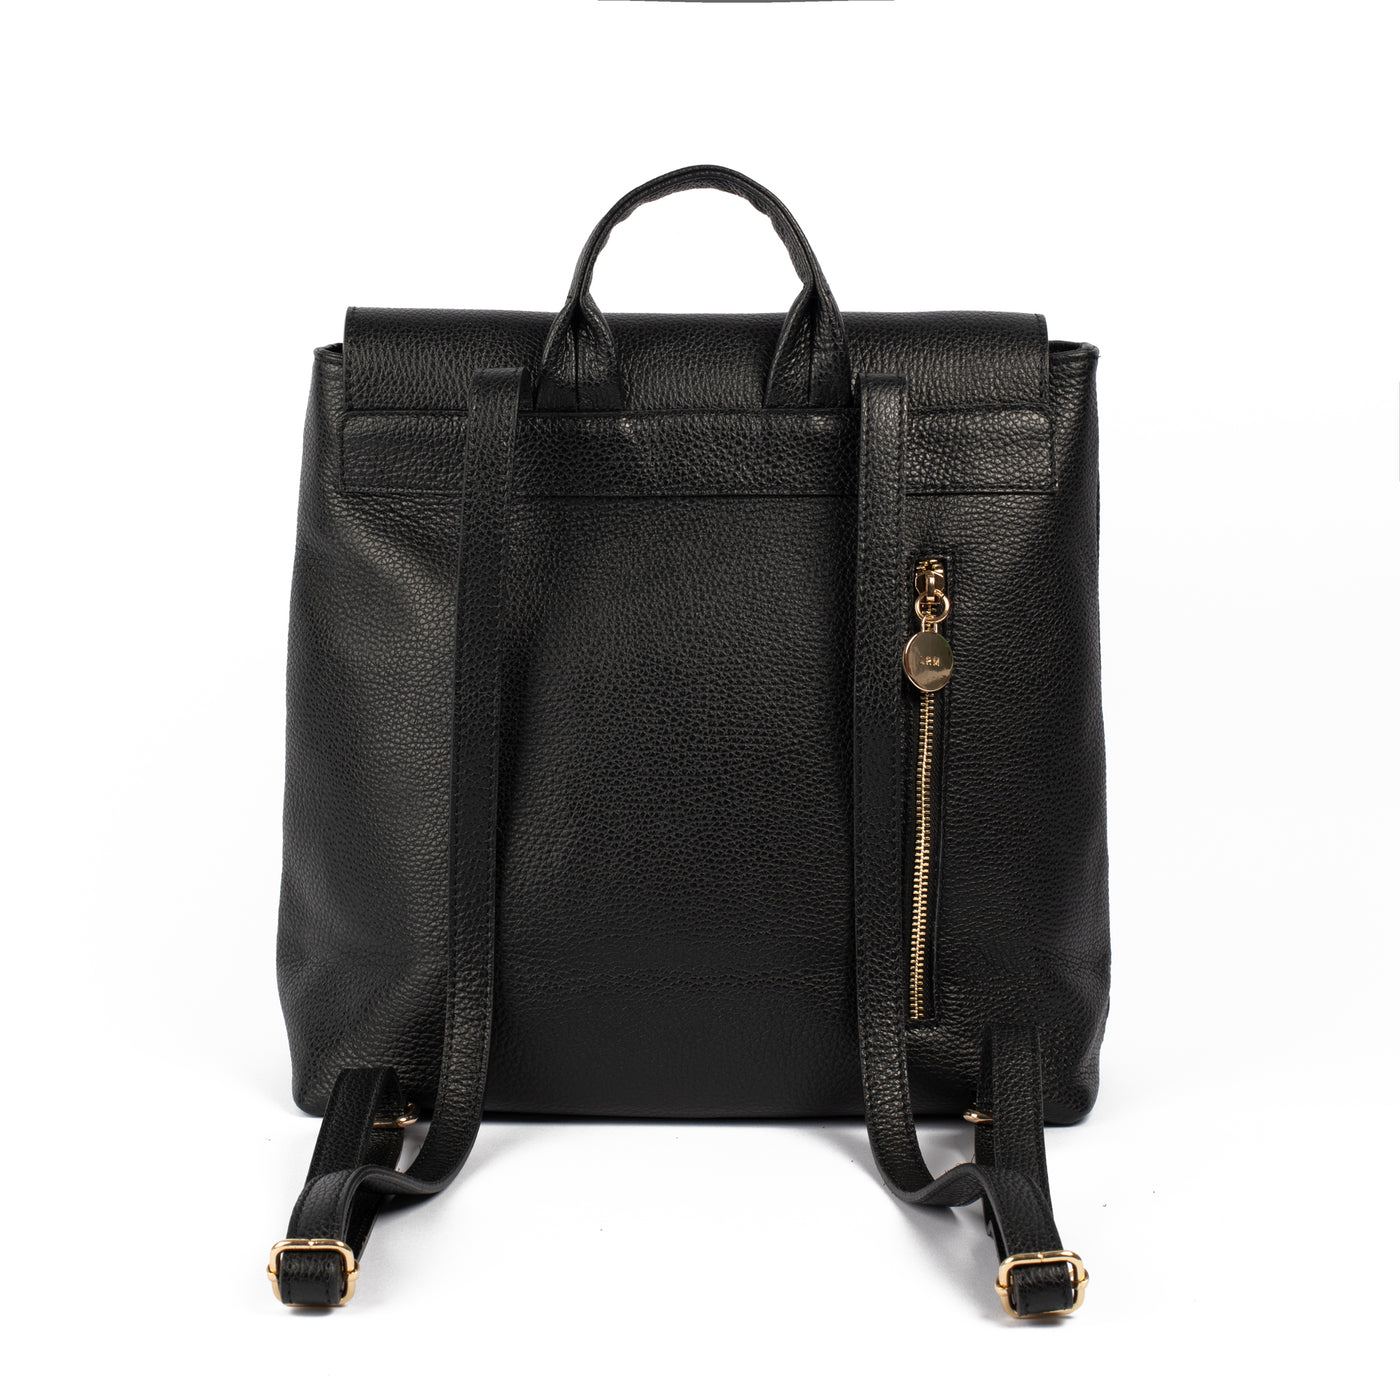 The Beatrice Backpack